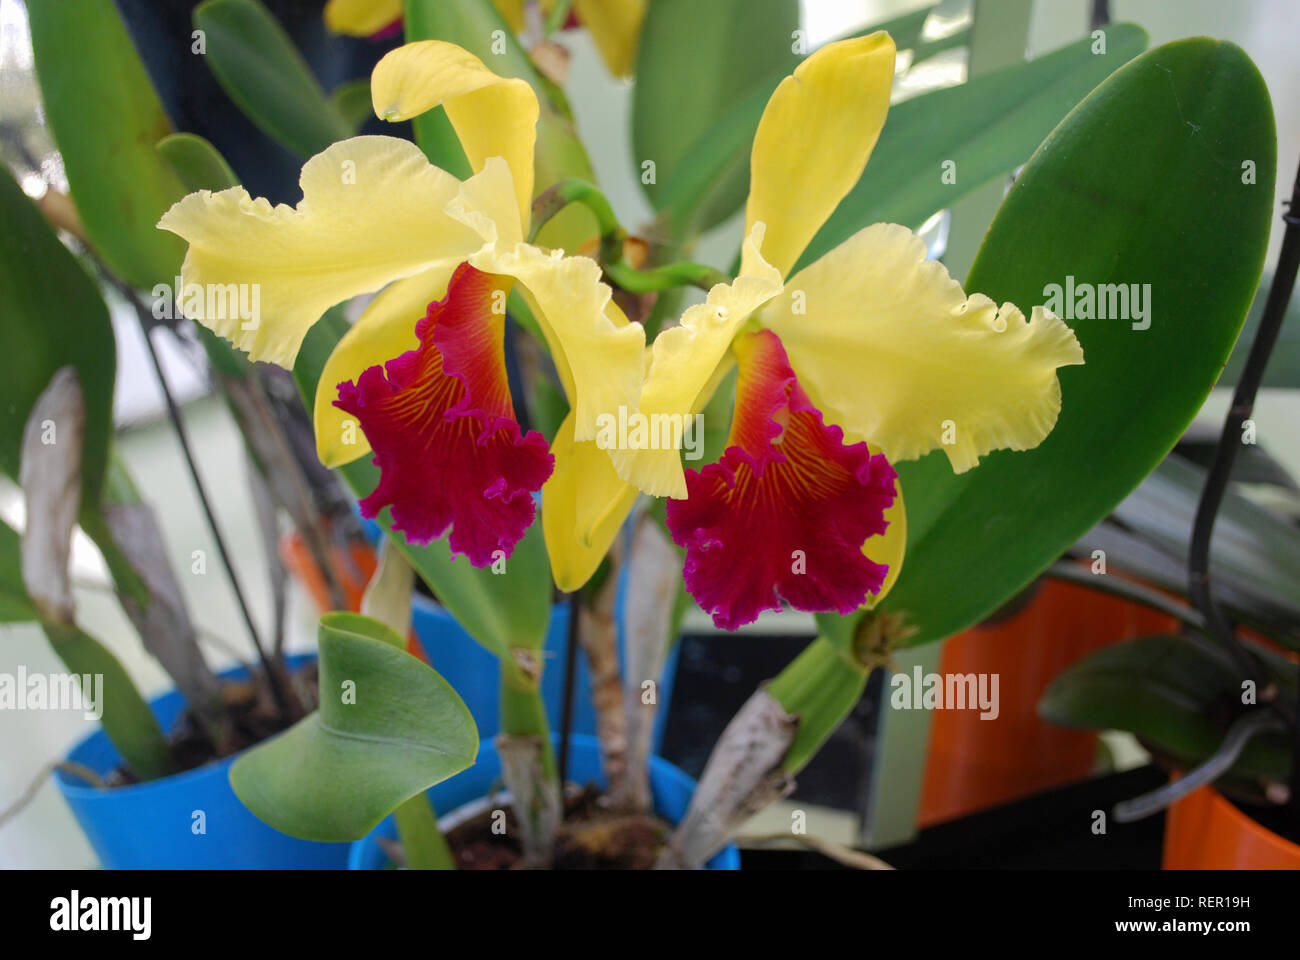 Cattleya dowiana flowers. Decorative plants for gardening and greenhouse. Stock Photo